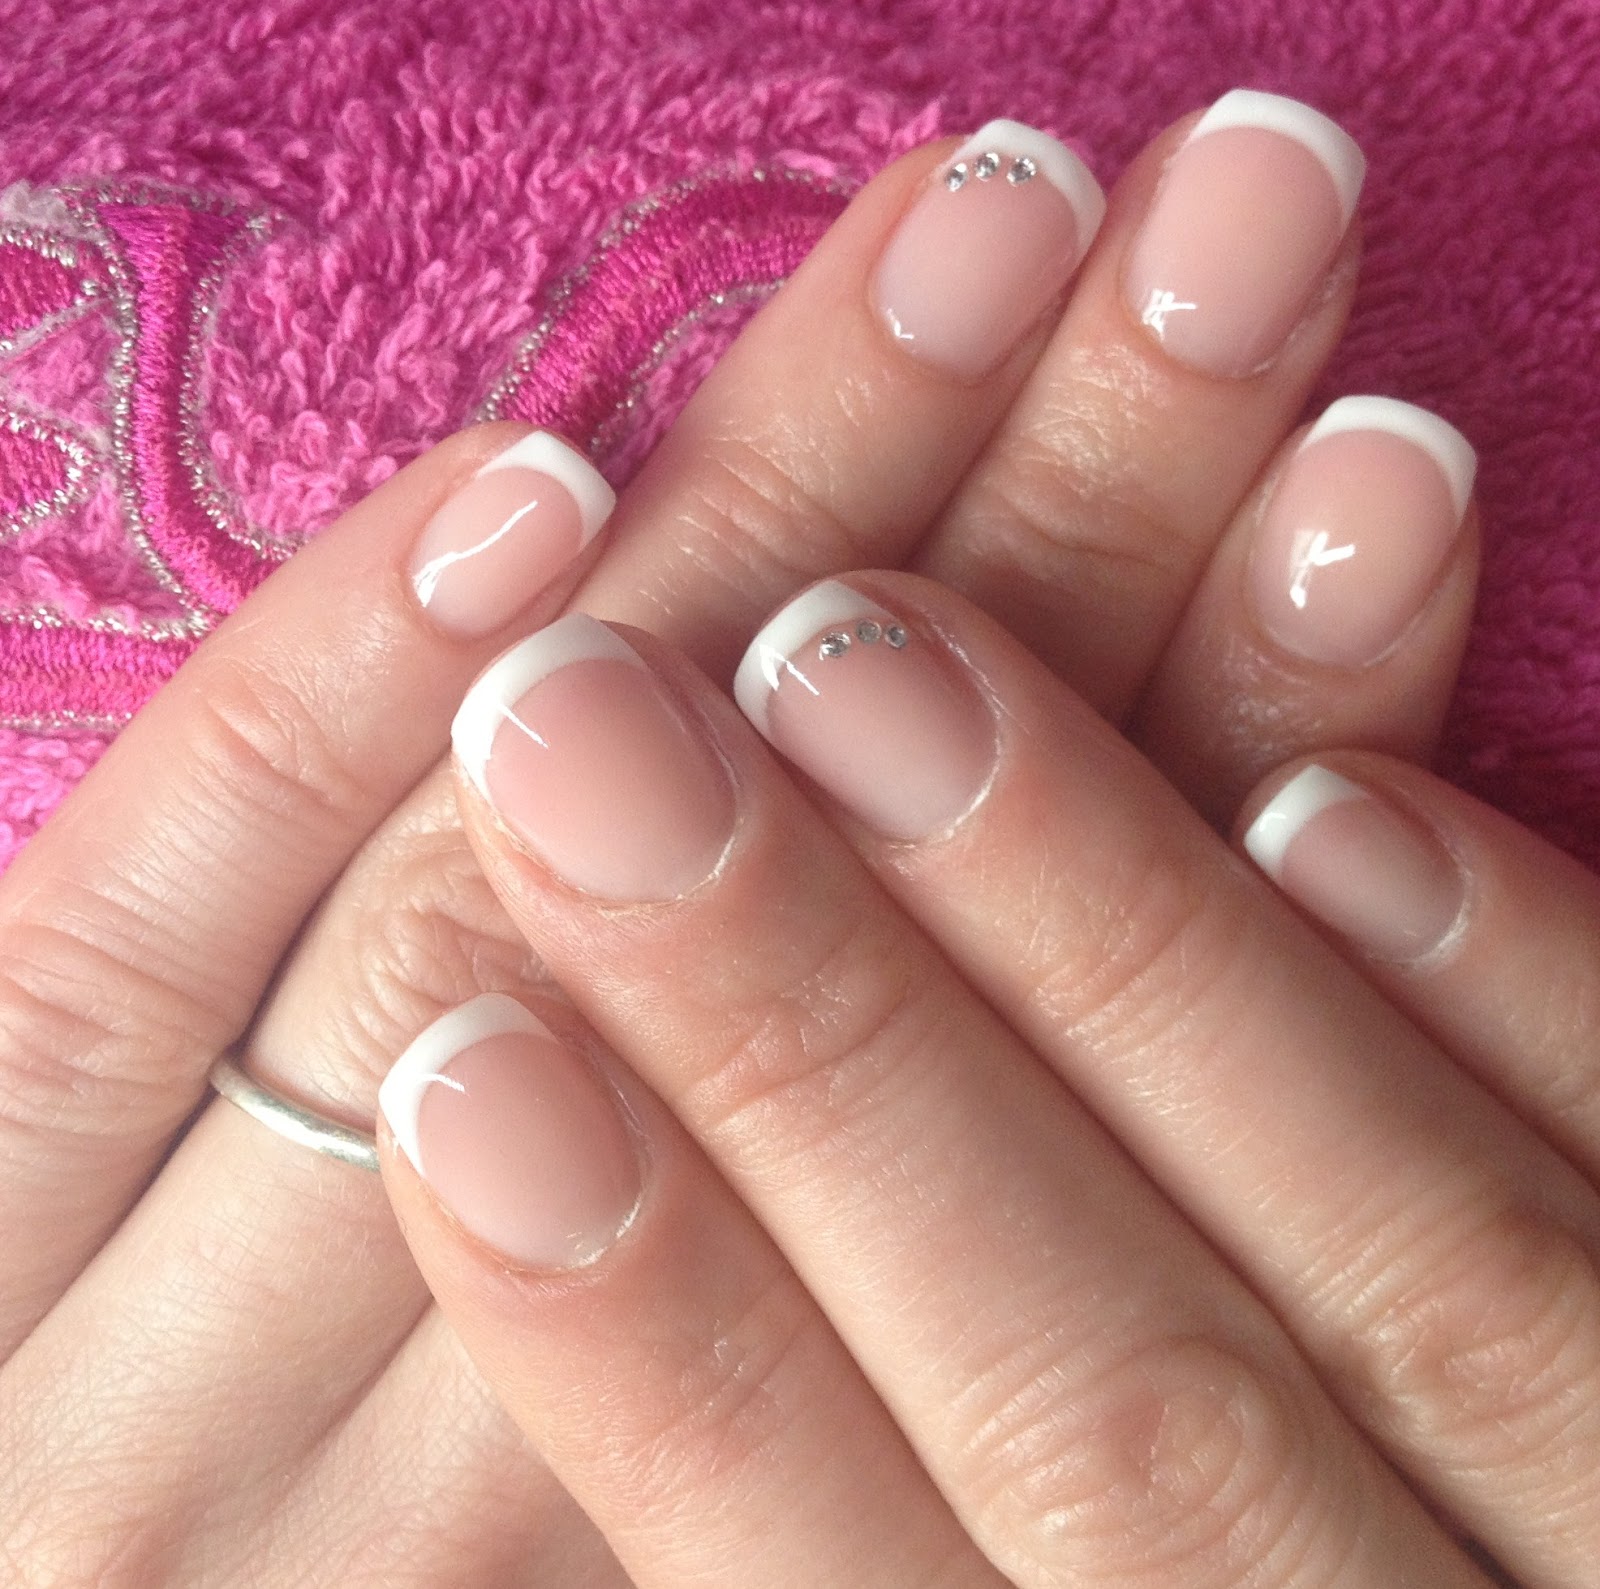 Glamour Nails Gel On Natural Nails Overlay